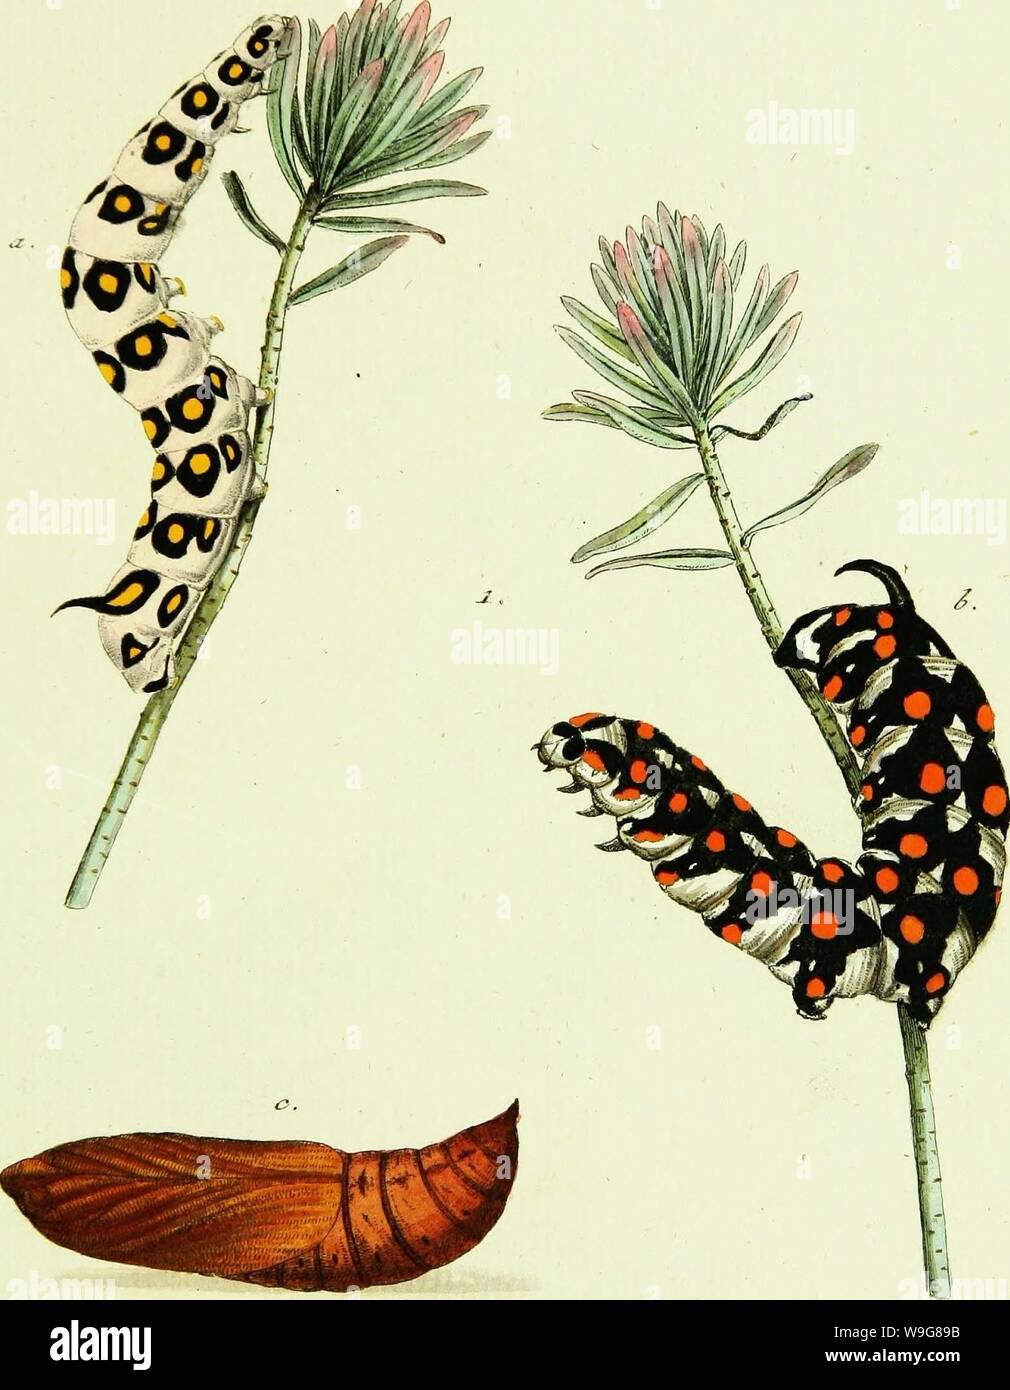 Archive image from page 138 of Geschichte europäischer Schmetterlinge (1806). Geschichte europäischer Schmetterlinge  CUbiodiversity1742385-9607 Year: 1806 ( — «was.. «9. iF: (2 'j&JUkgg.&&lt;t J/f. /rs/T?, ,J5.    Cr. c-. Cz/pa'Z7/ &,ffl Stock Photo